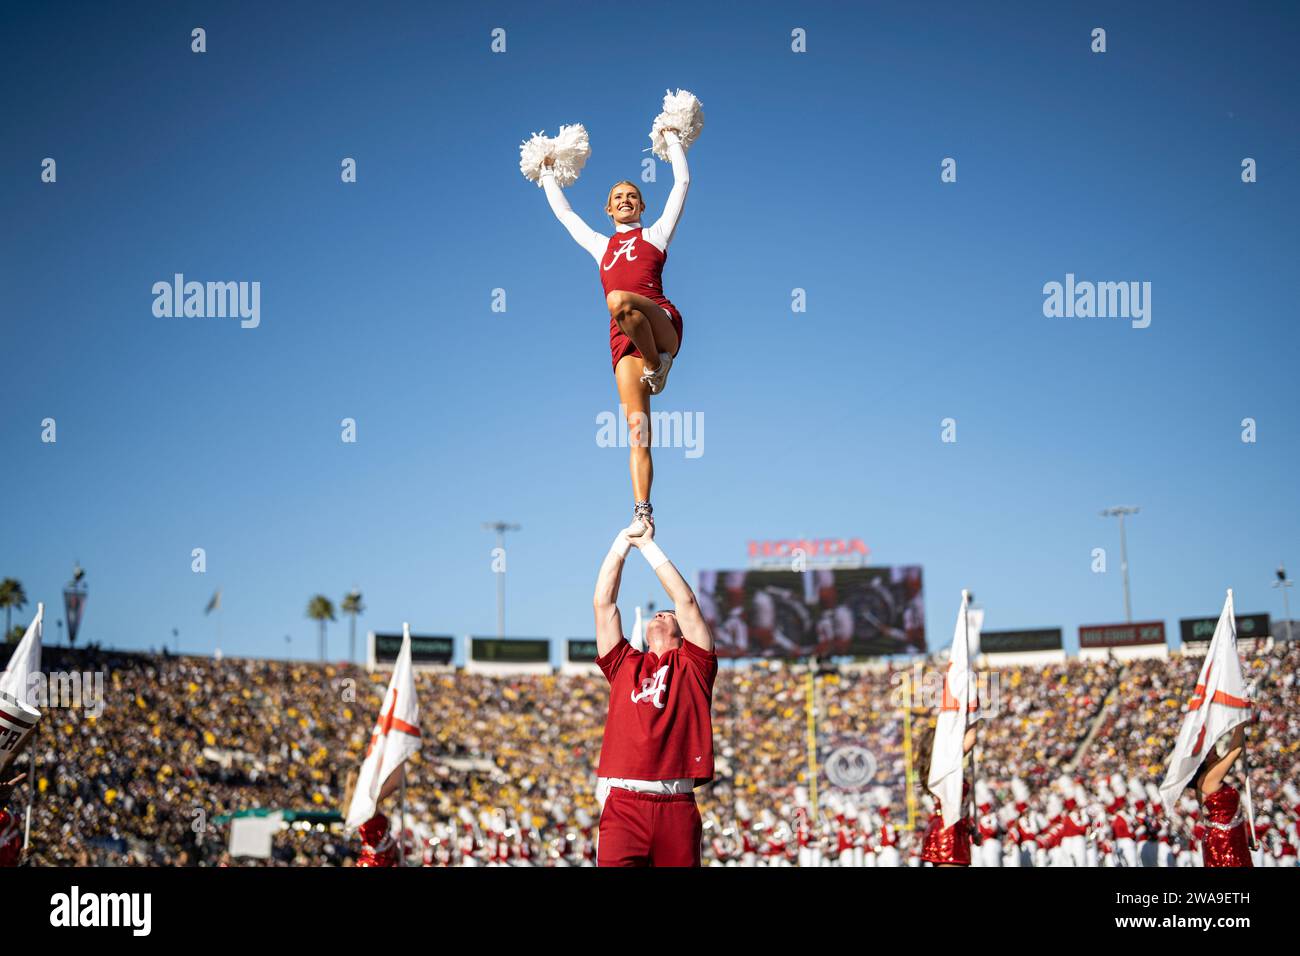 Alabama Crimson Tide cheer leaders during the CFP Semifinal at the Rose Bowl Game between the Alabama Crimson Tide and Michigan Wolverines, Monday, Ja Stock Photo